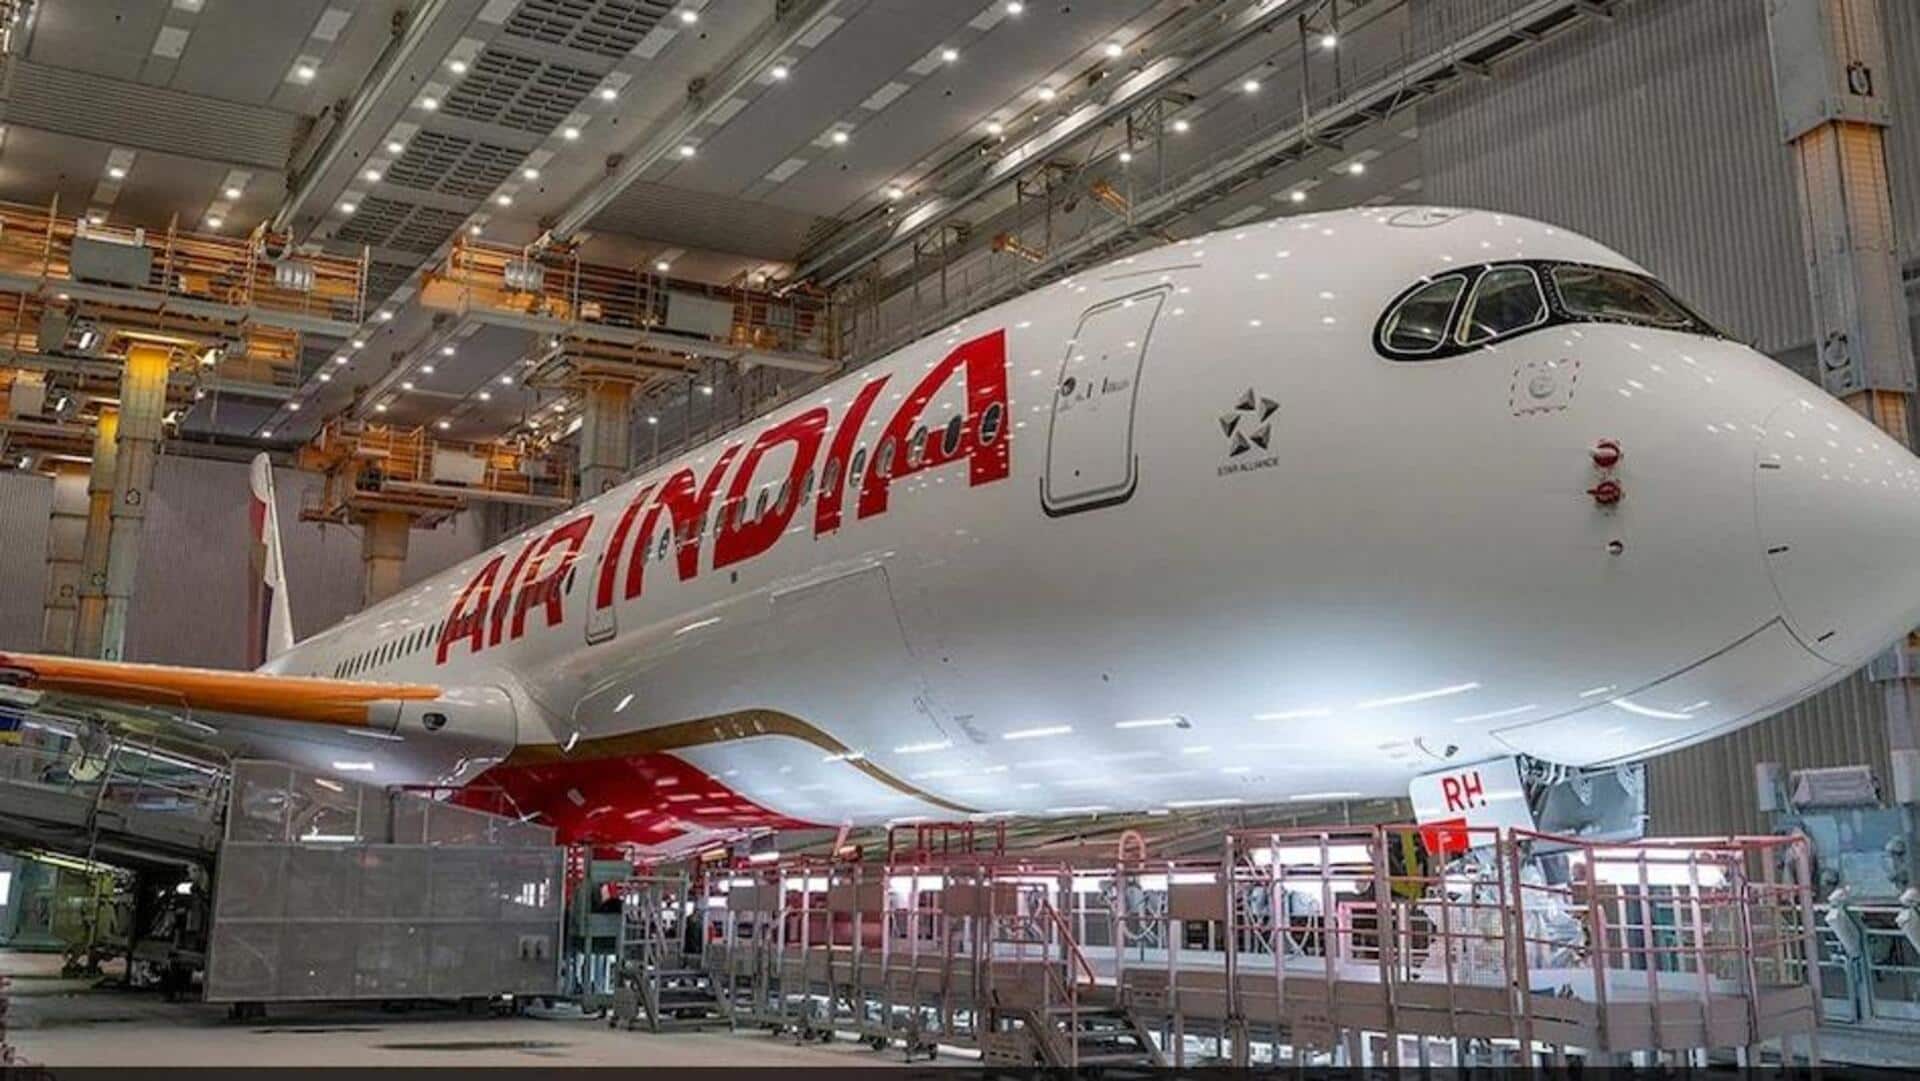 Air India's last Boeing 747 'Agra' embarks on final journey